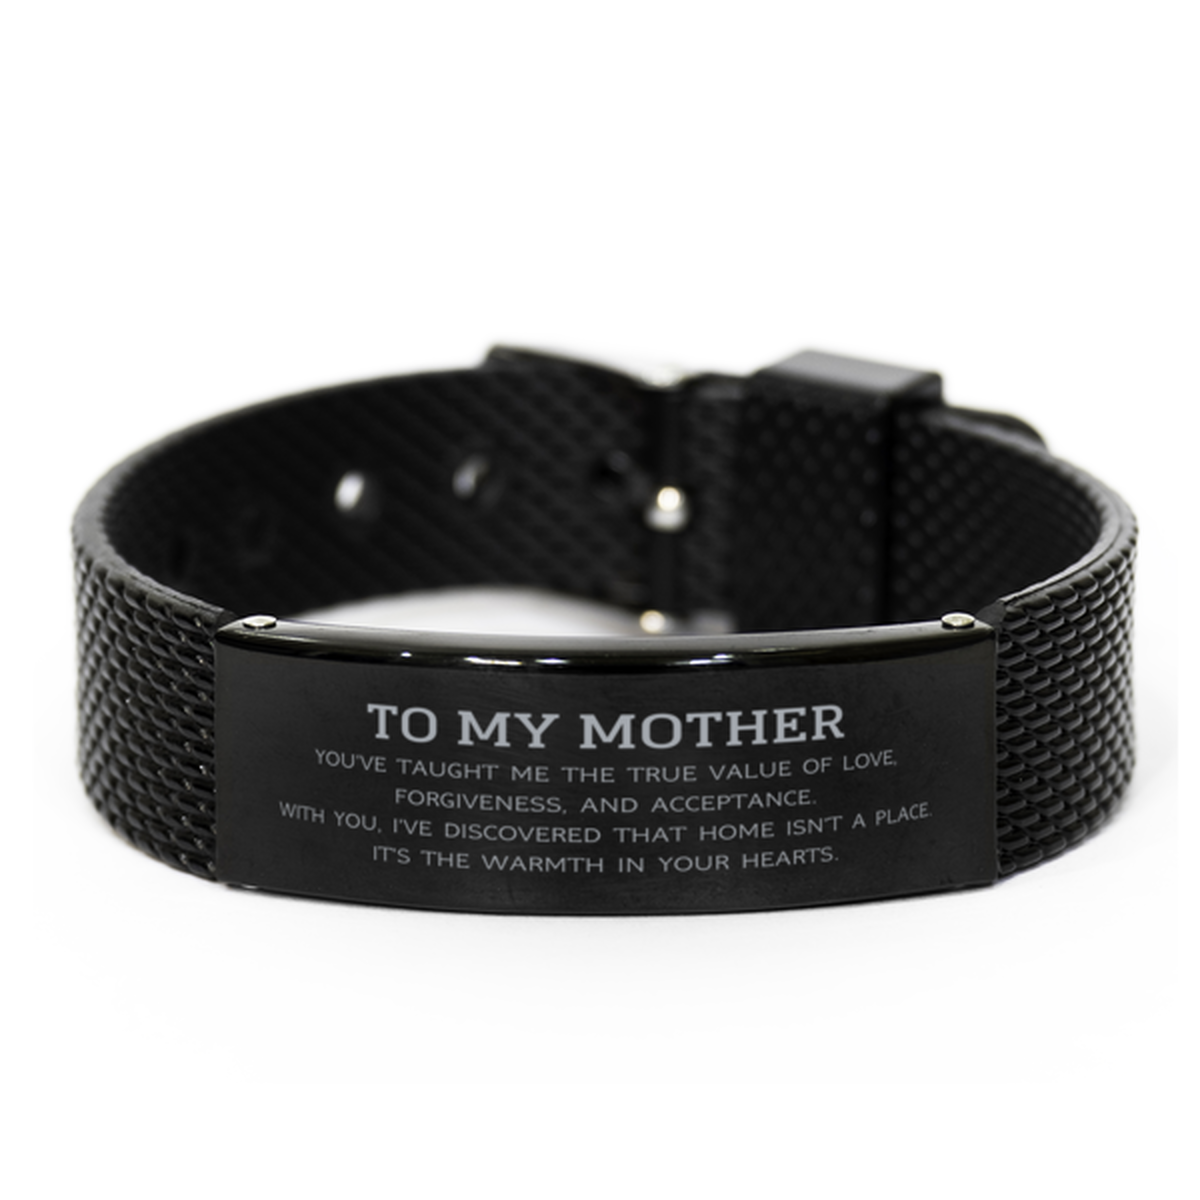 To My Mother Gifts, You've taught me the true value of love, Thank You Gifts For Mother, Birthday Black Shark Mesh Bracelet For Mother